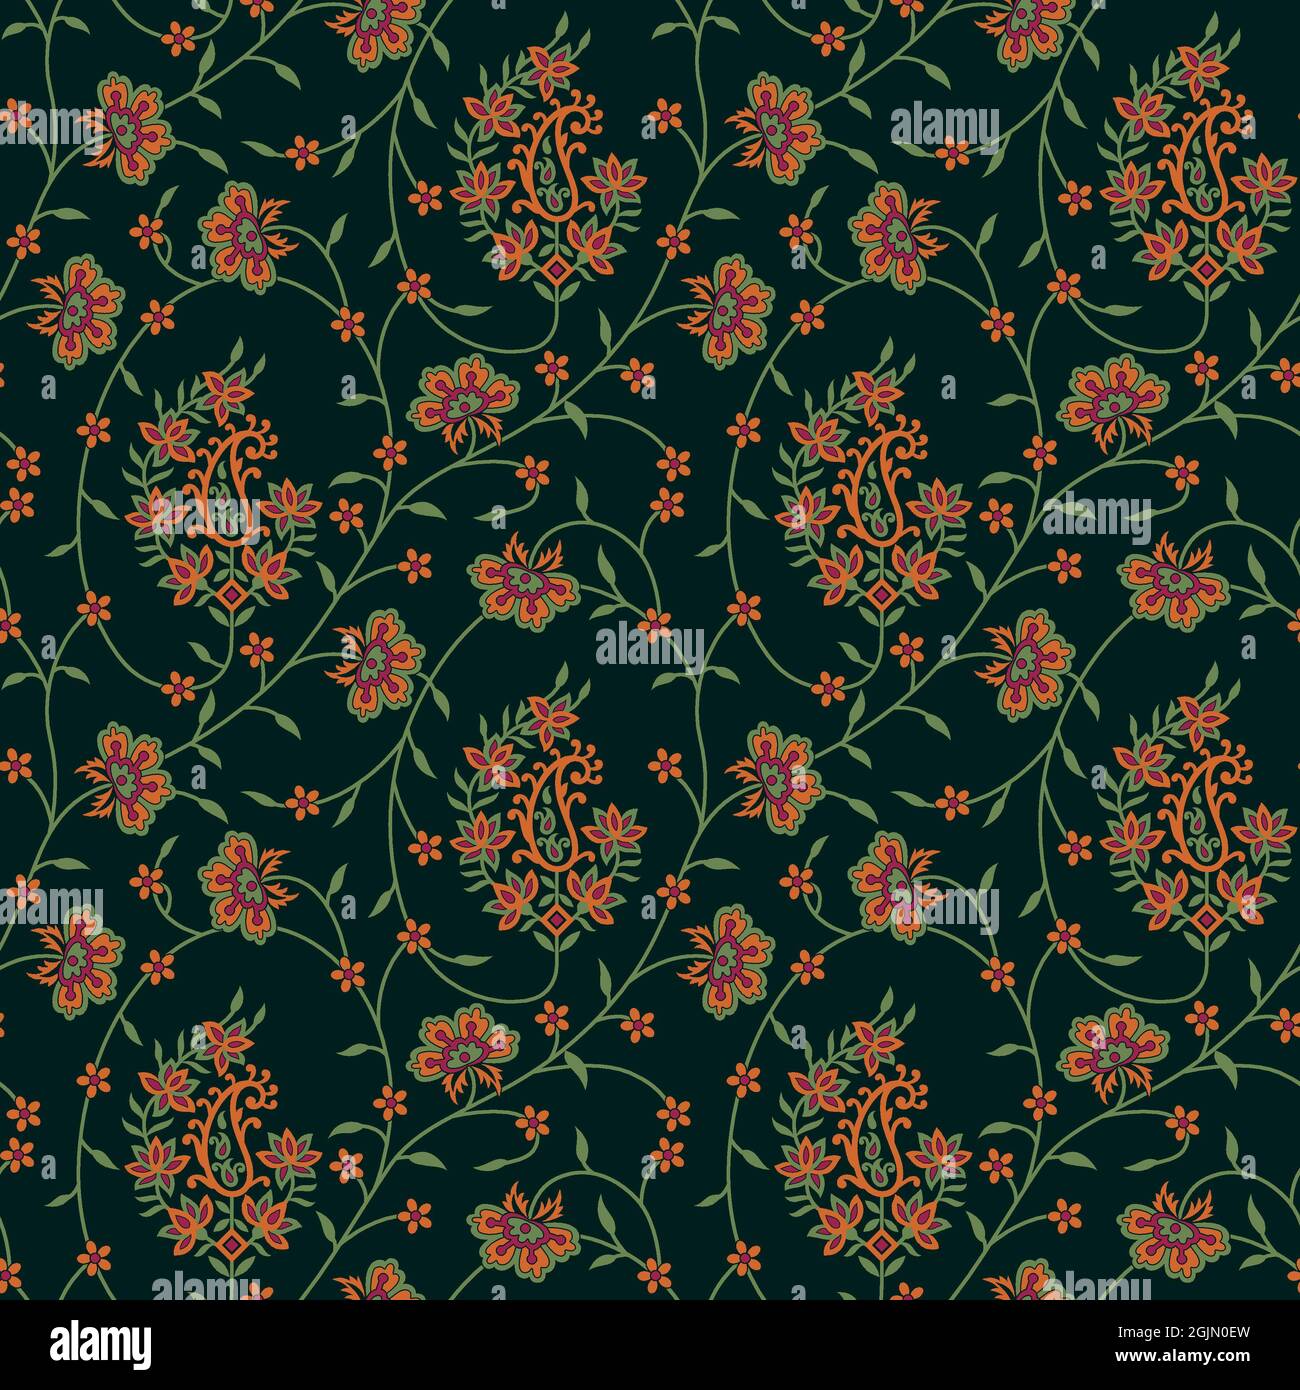 Green floral allover pattern design background Stock Photo